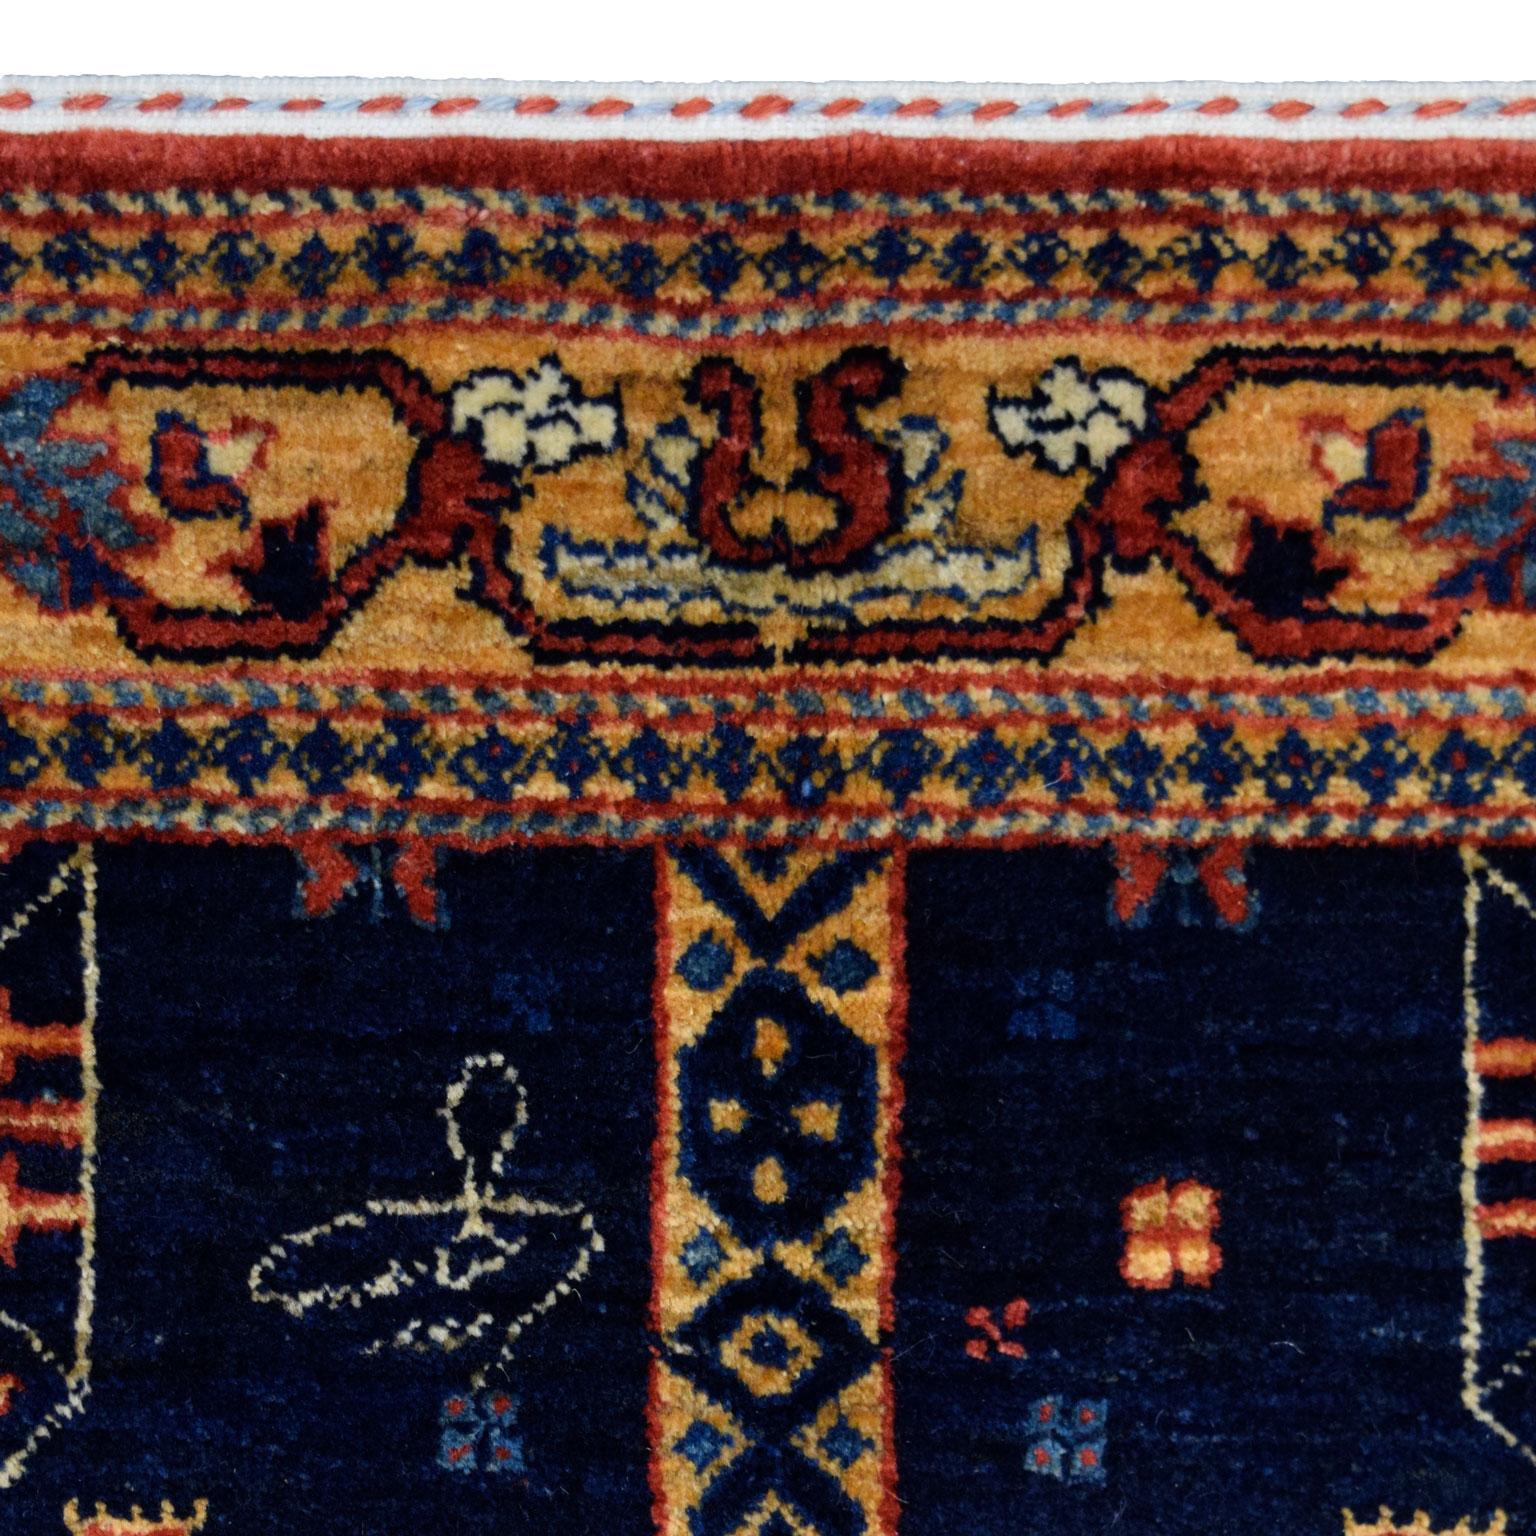 This Orley Shabahang Qashqai carpet from the Tribal Collection measures 4’2” x 6’2” and showcases an exquisite Qashqai design in indigo, gold, red, and cream wool. Hand-knotted in pure wool, Orley Shabahang’s signature Shekarloo weave produces a